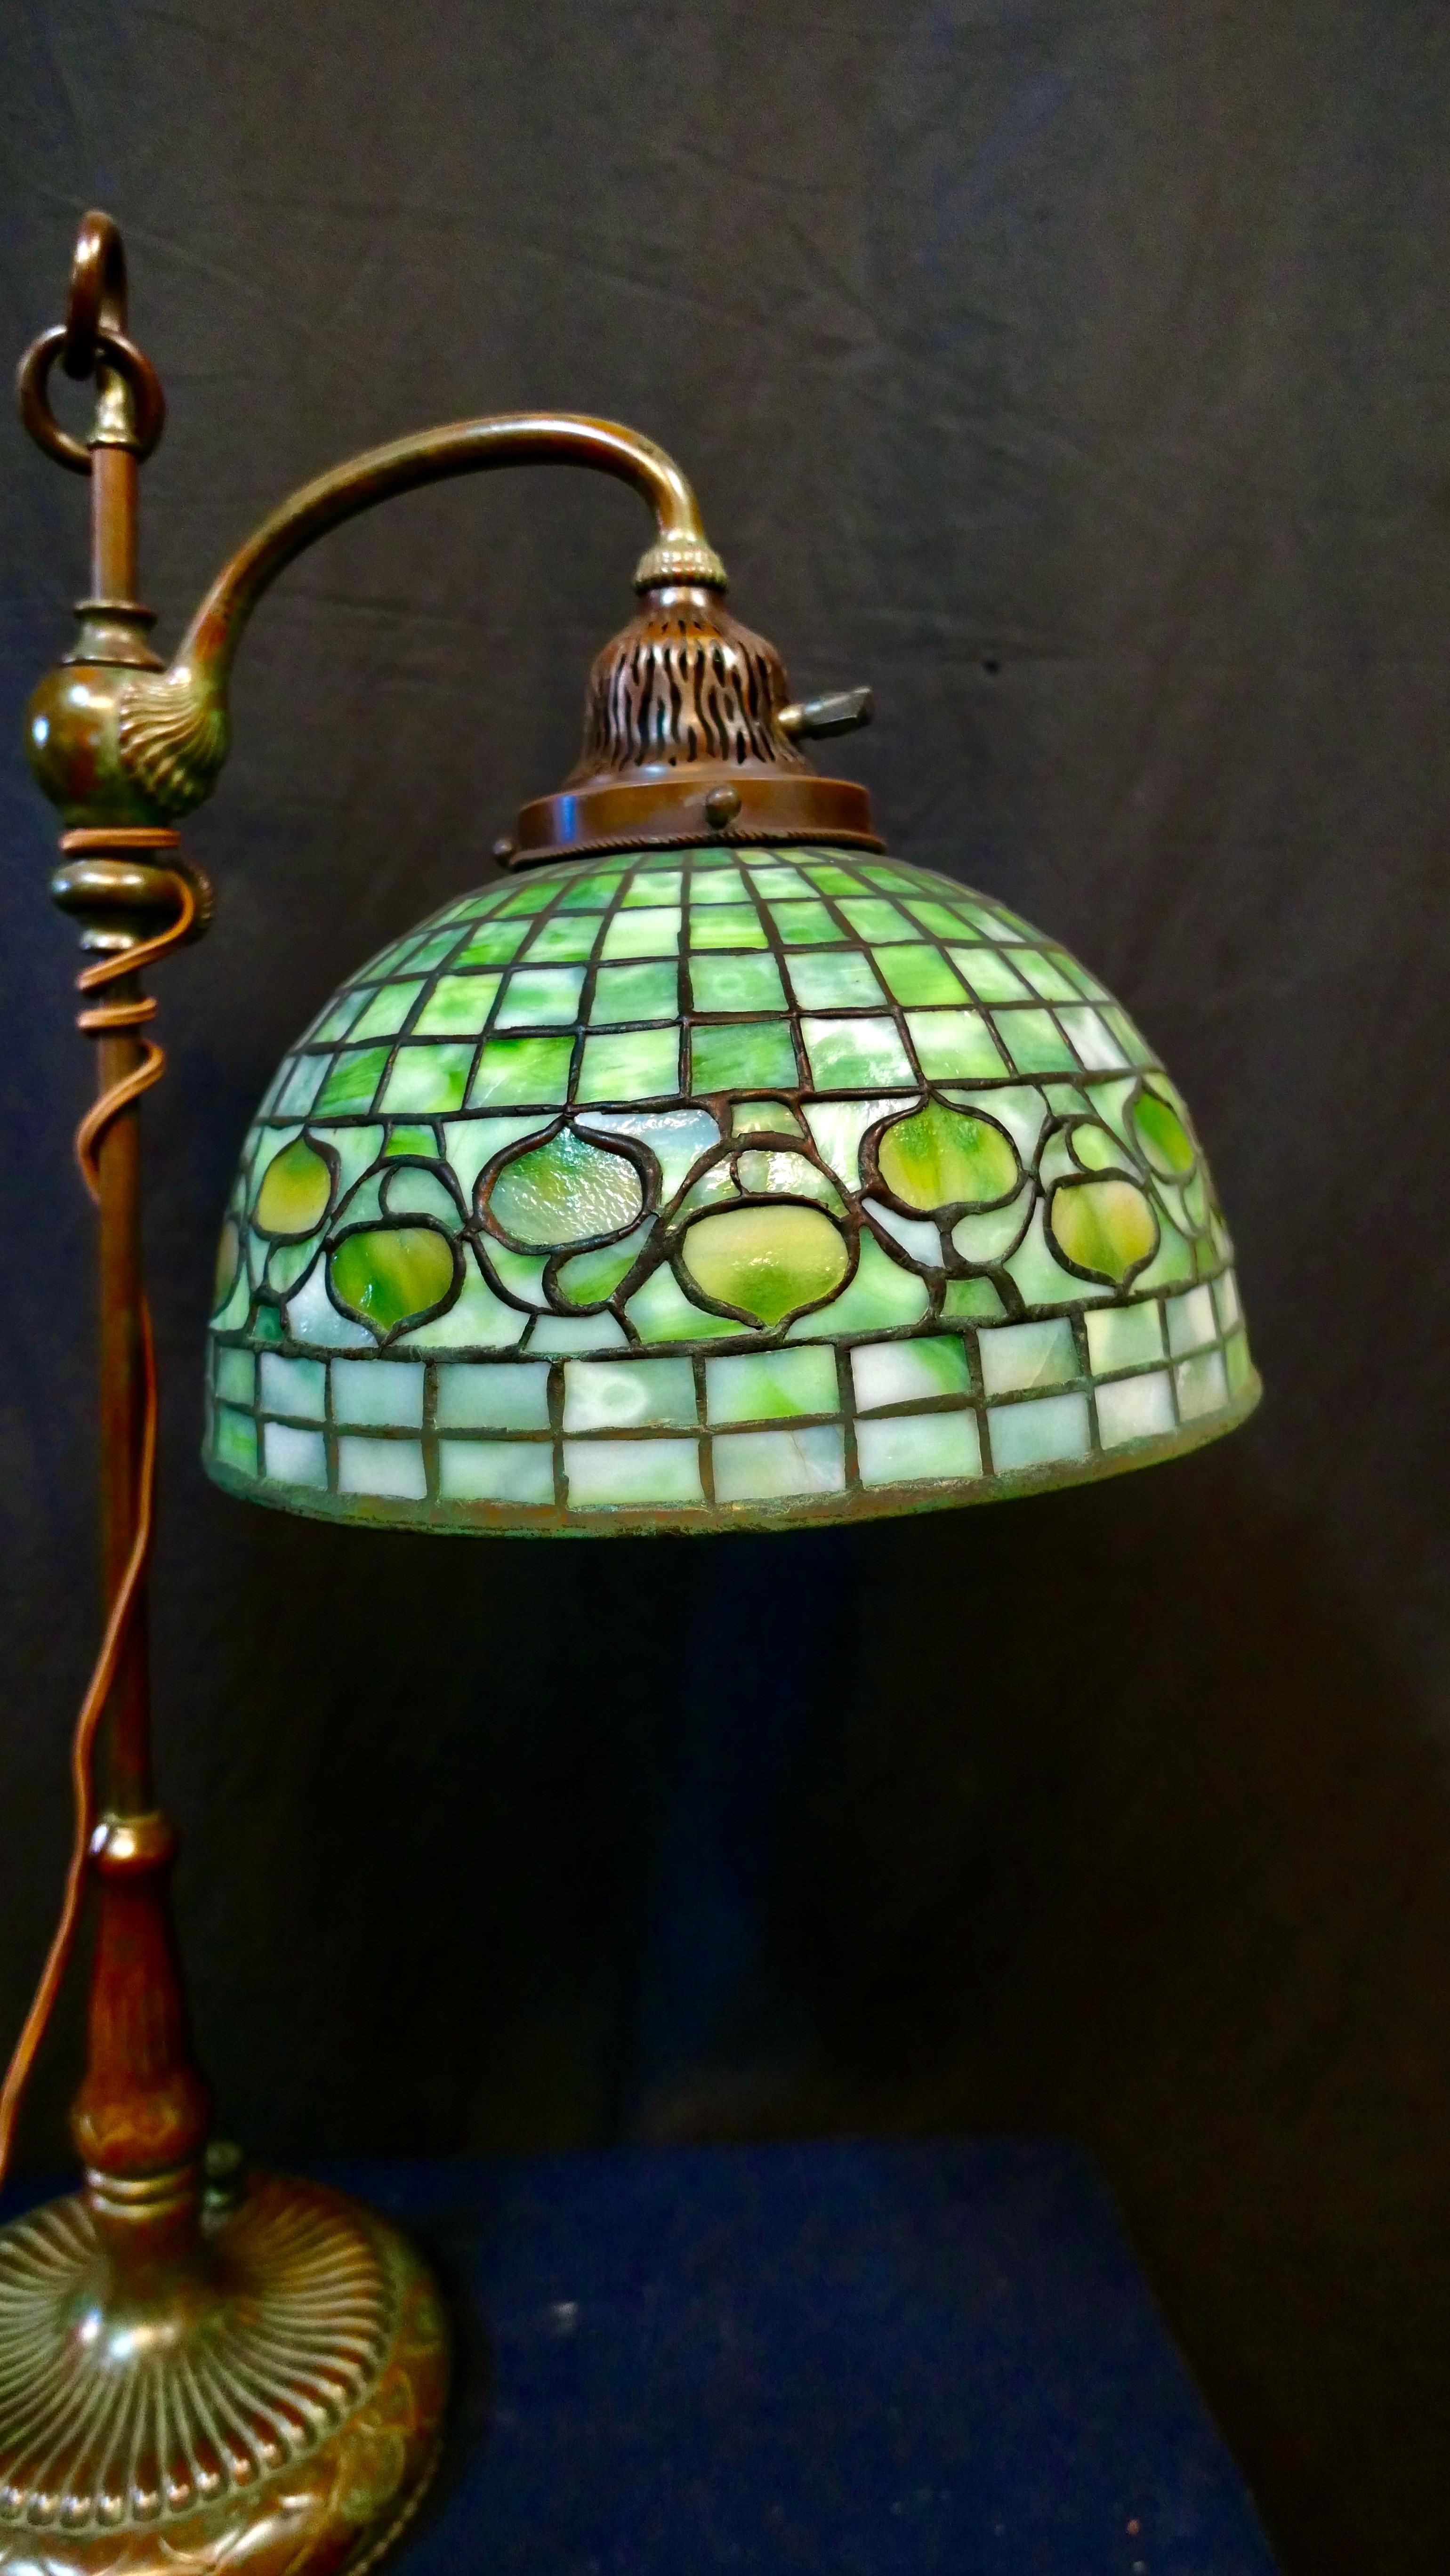 This stylish vintage Tiffany Studios, New York original table lamp is beautifully designed with a colorful Acorn banded favrile art glass shade. This leaded shade decorates a patinated tall & slender adjustable bronze lamp base. The shade is stamped